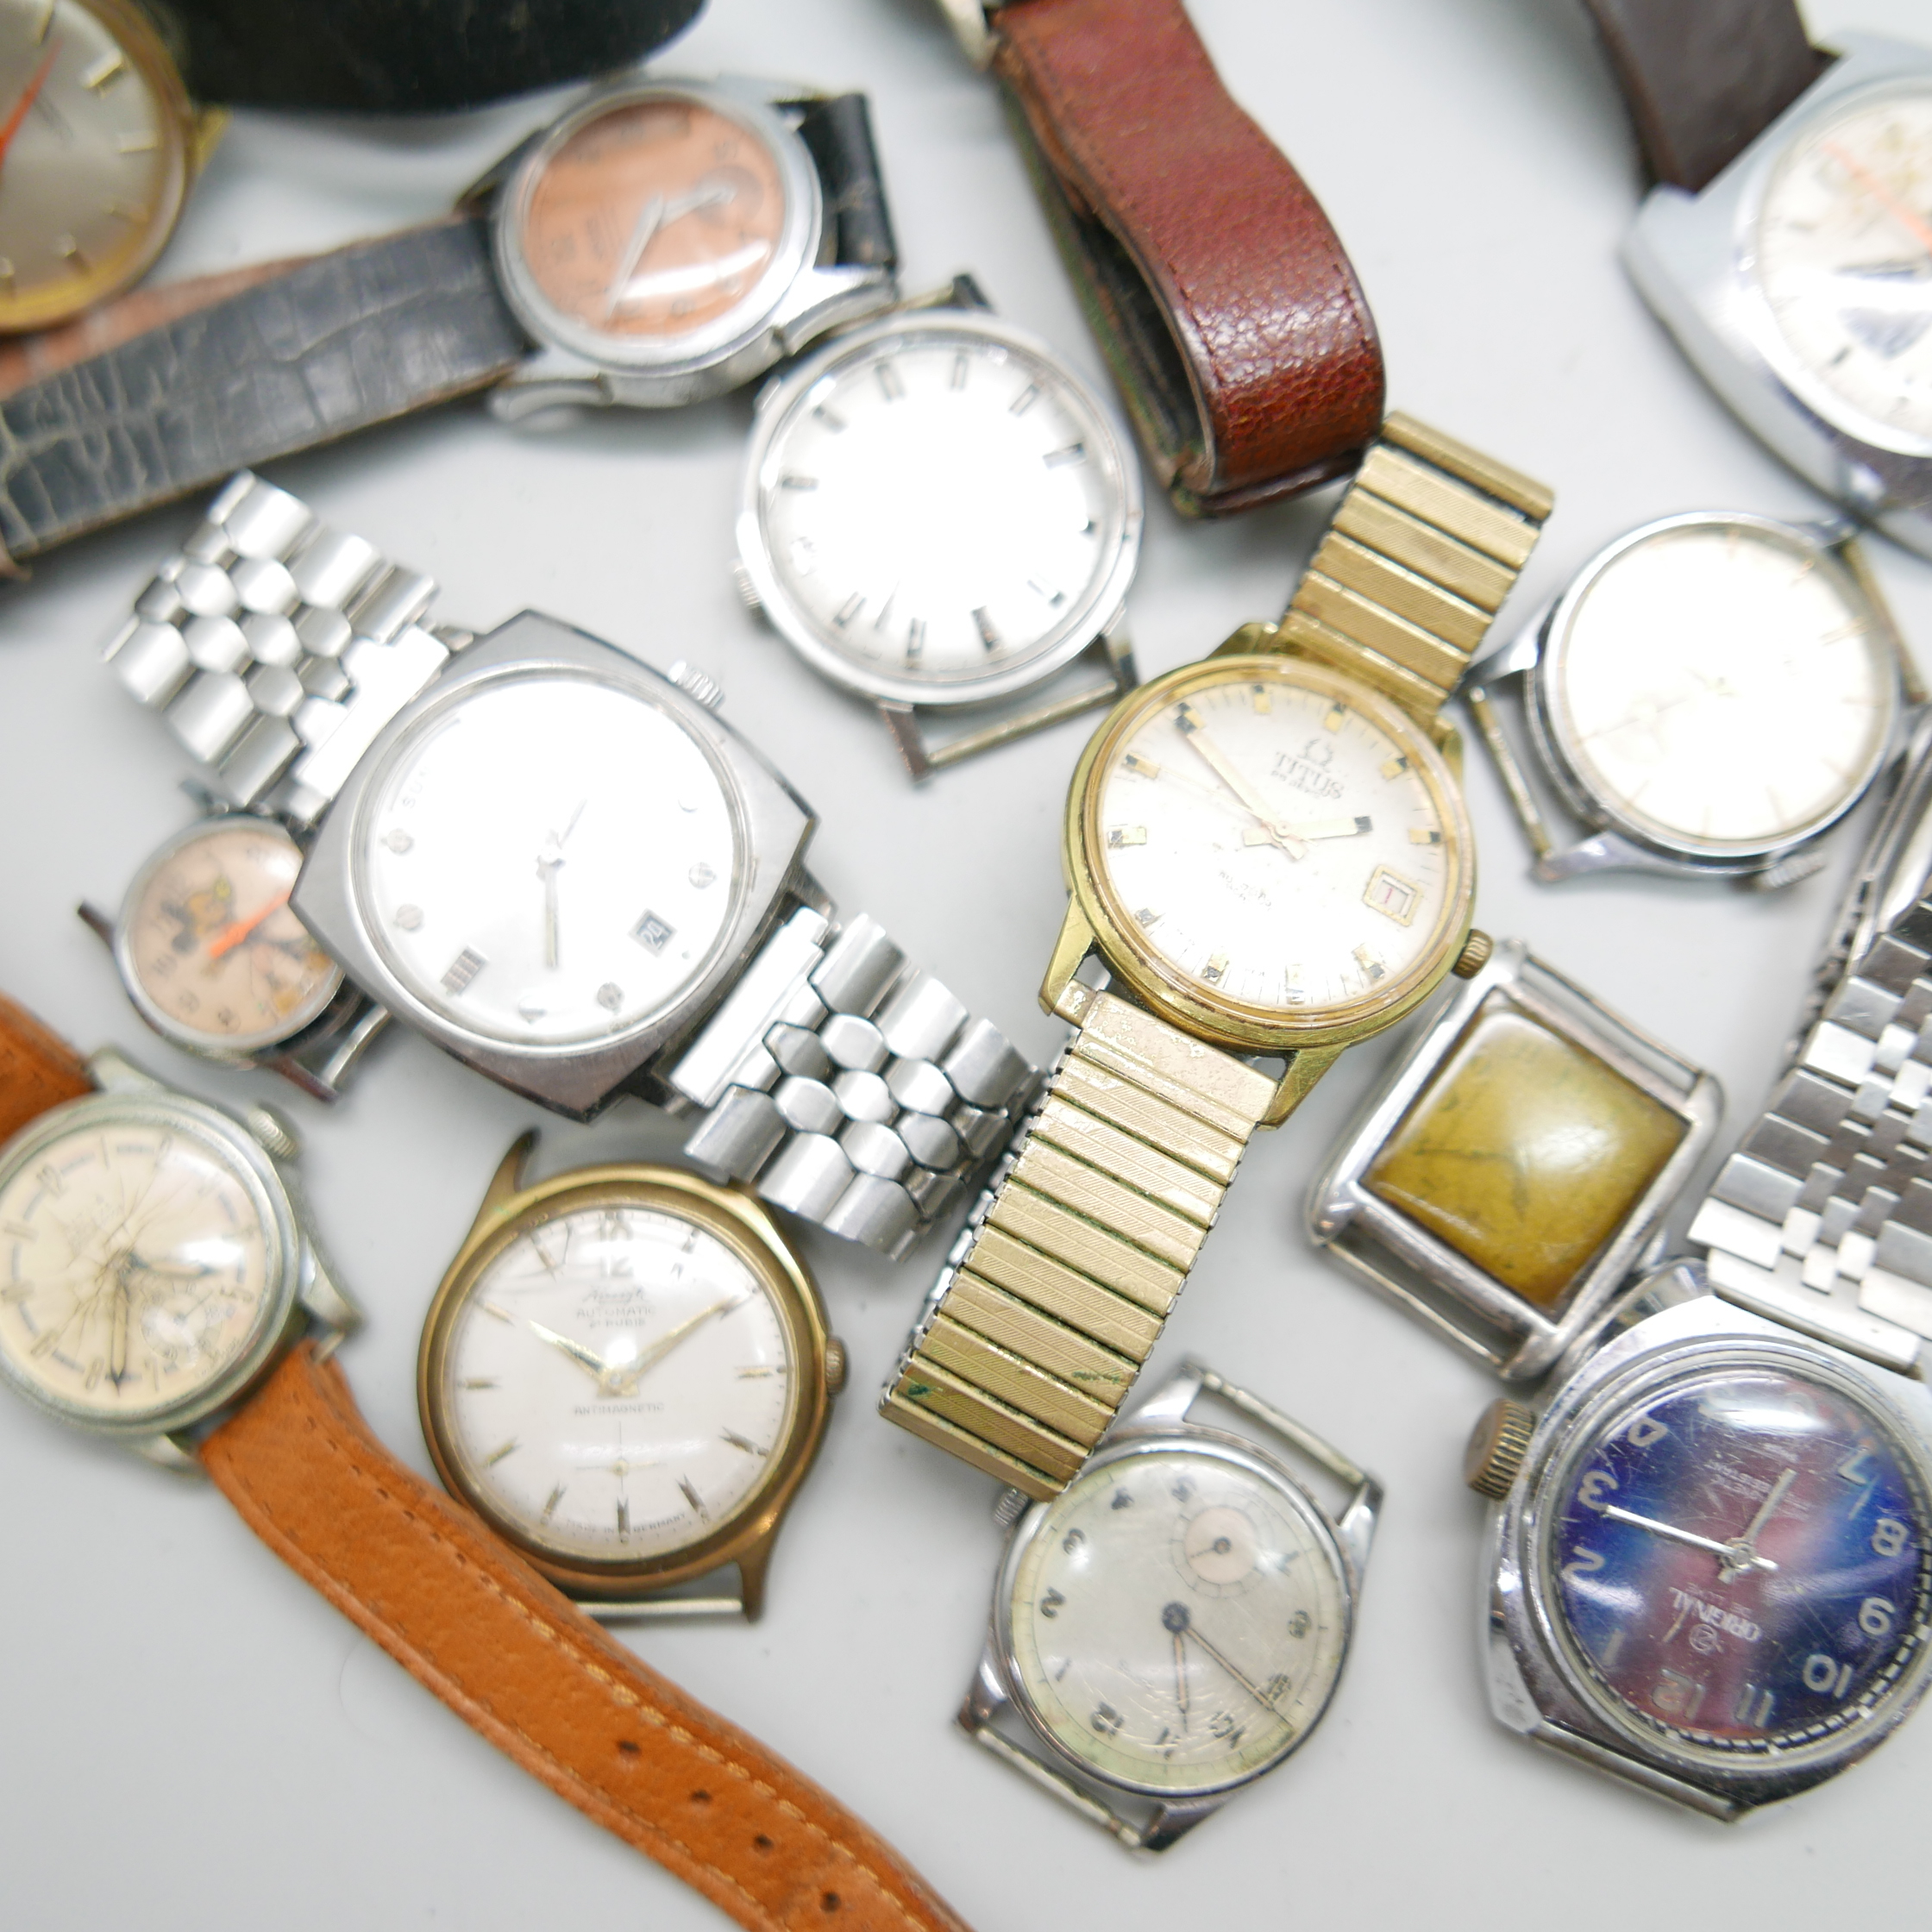 An Exactima chronograph wristwatch, others include Titus, Smiths, Oriosa, etc. - Image 2 of 2